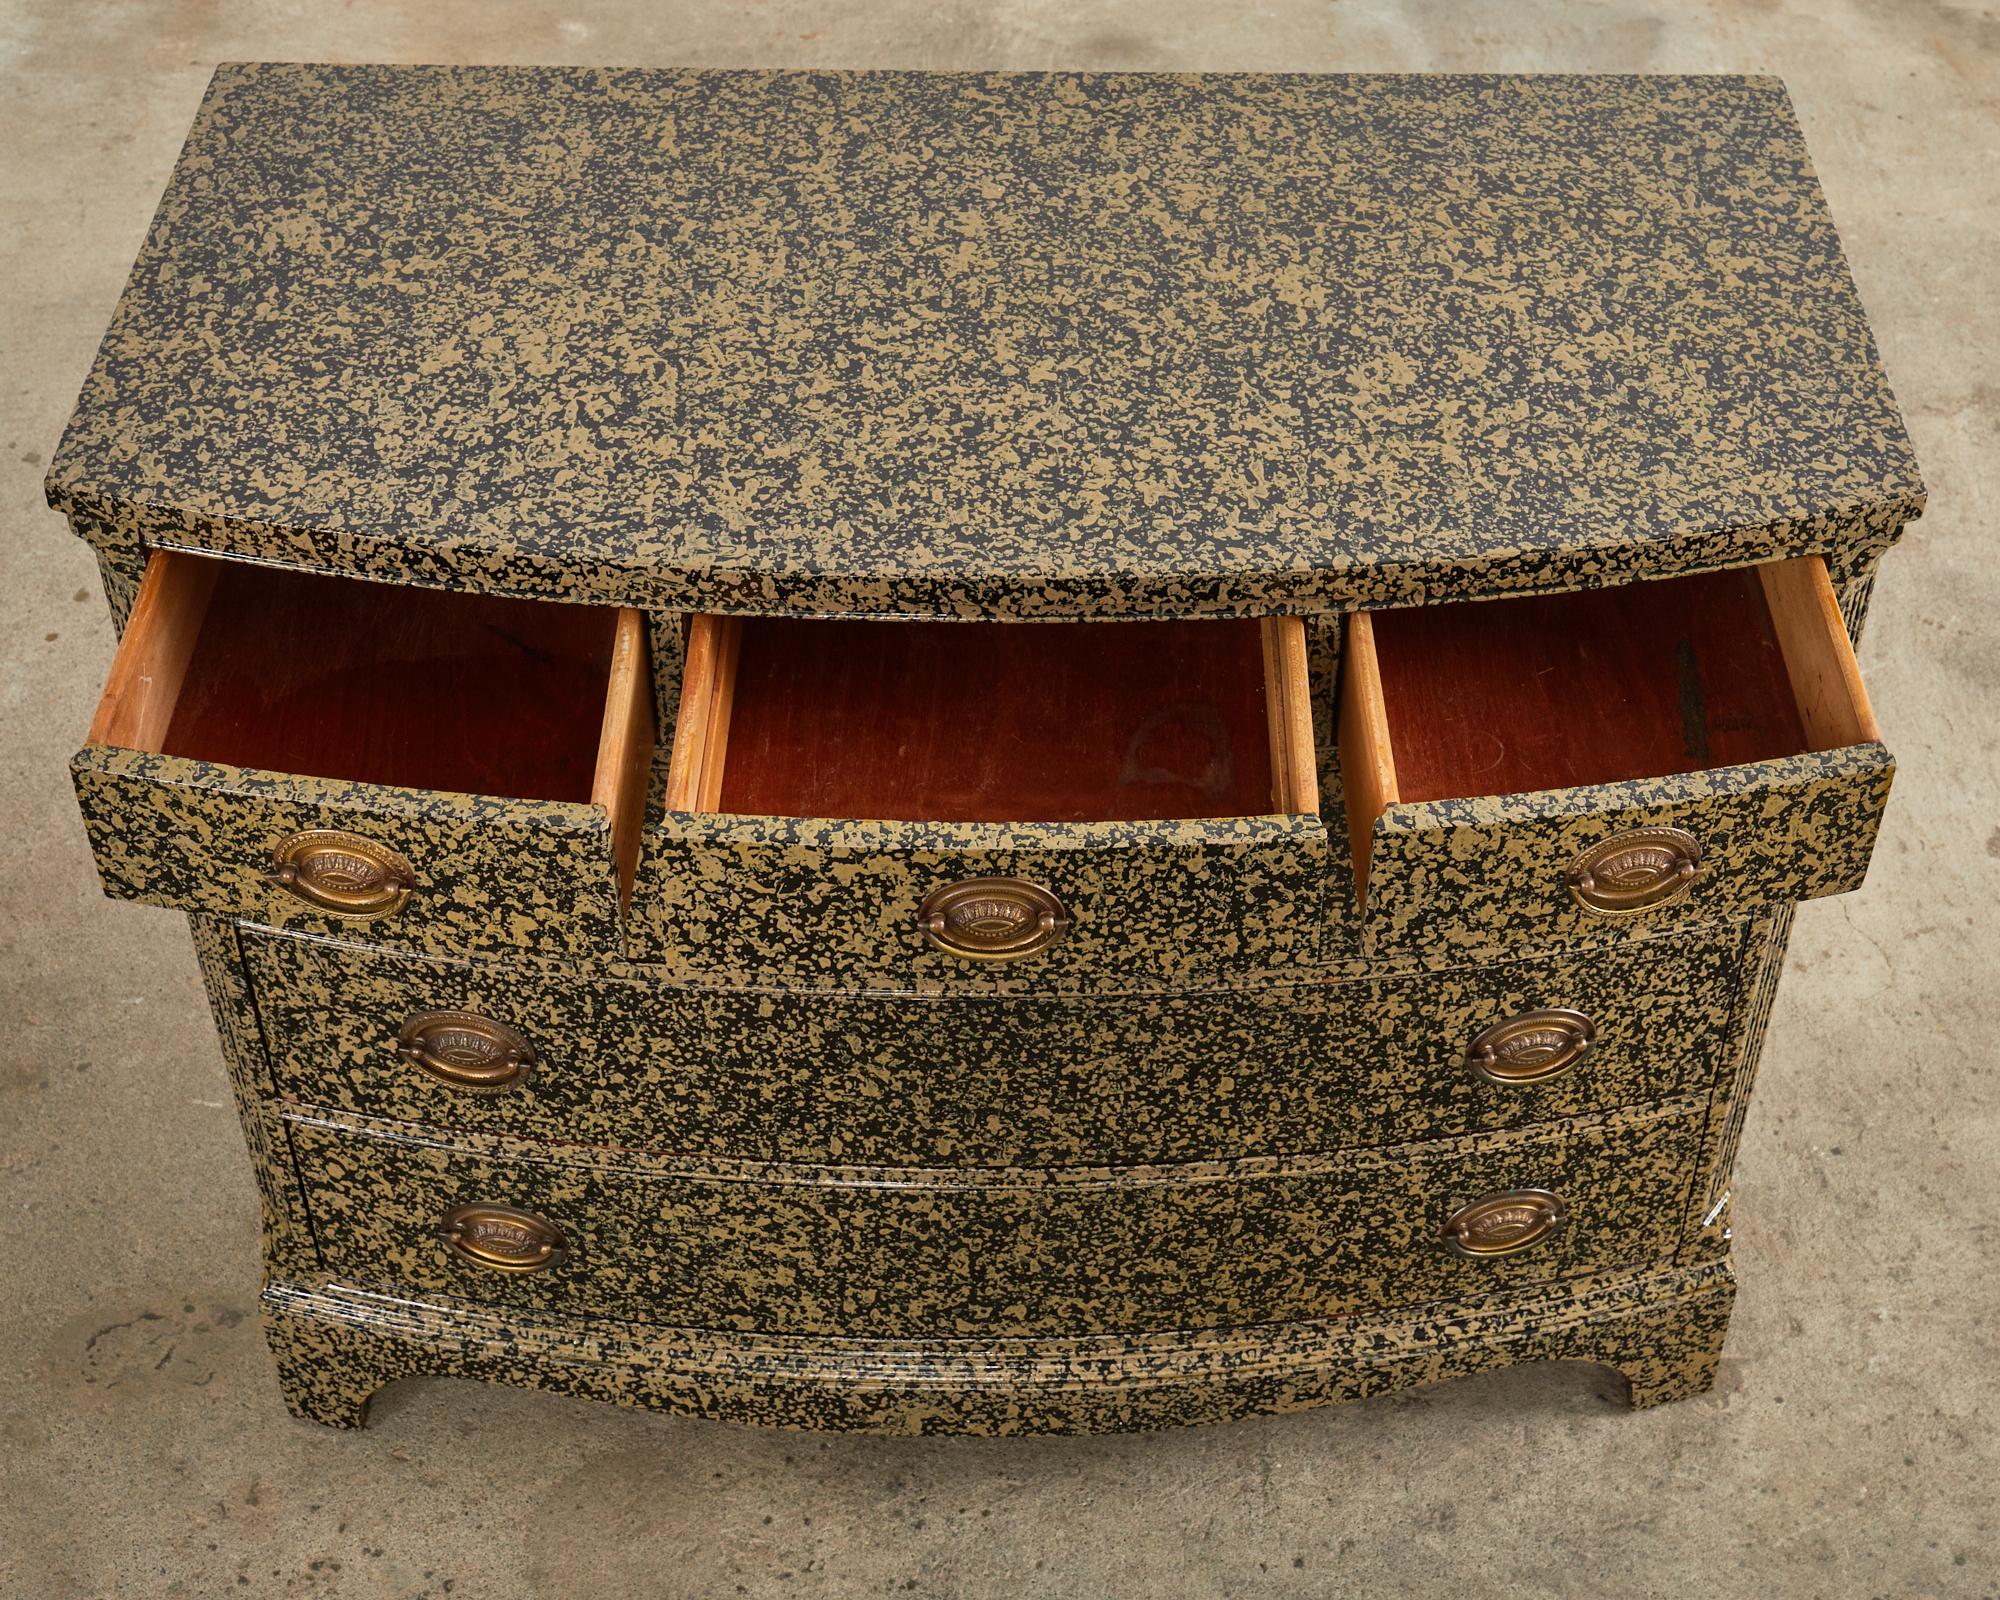 19th Century English Georgian Commode Speckled by Ira Yeager 1